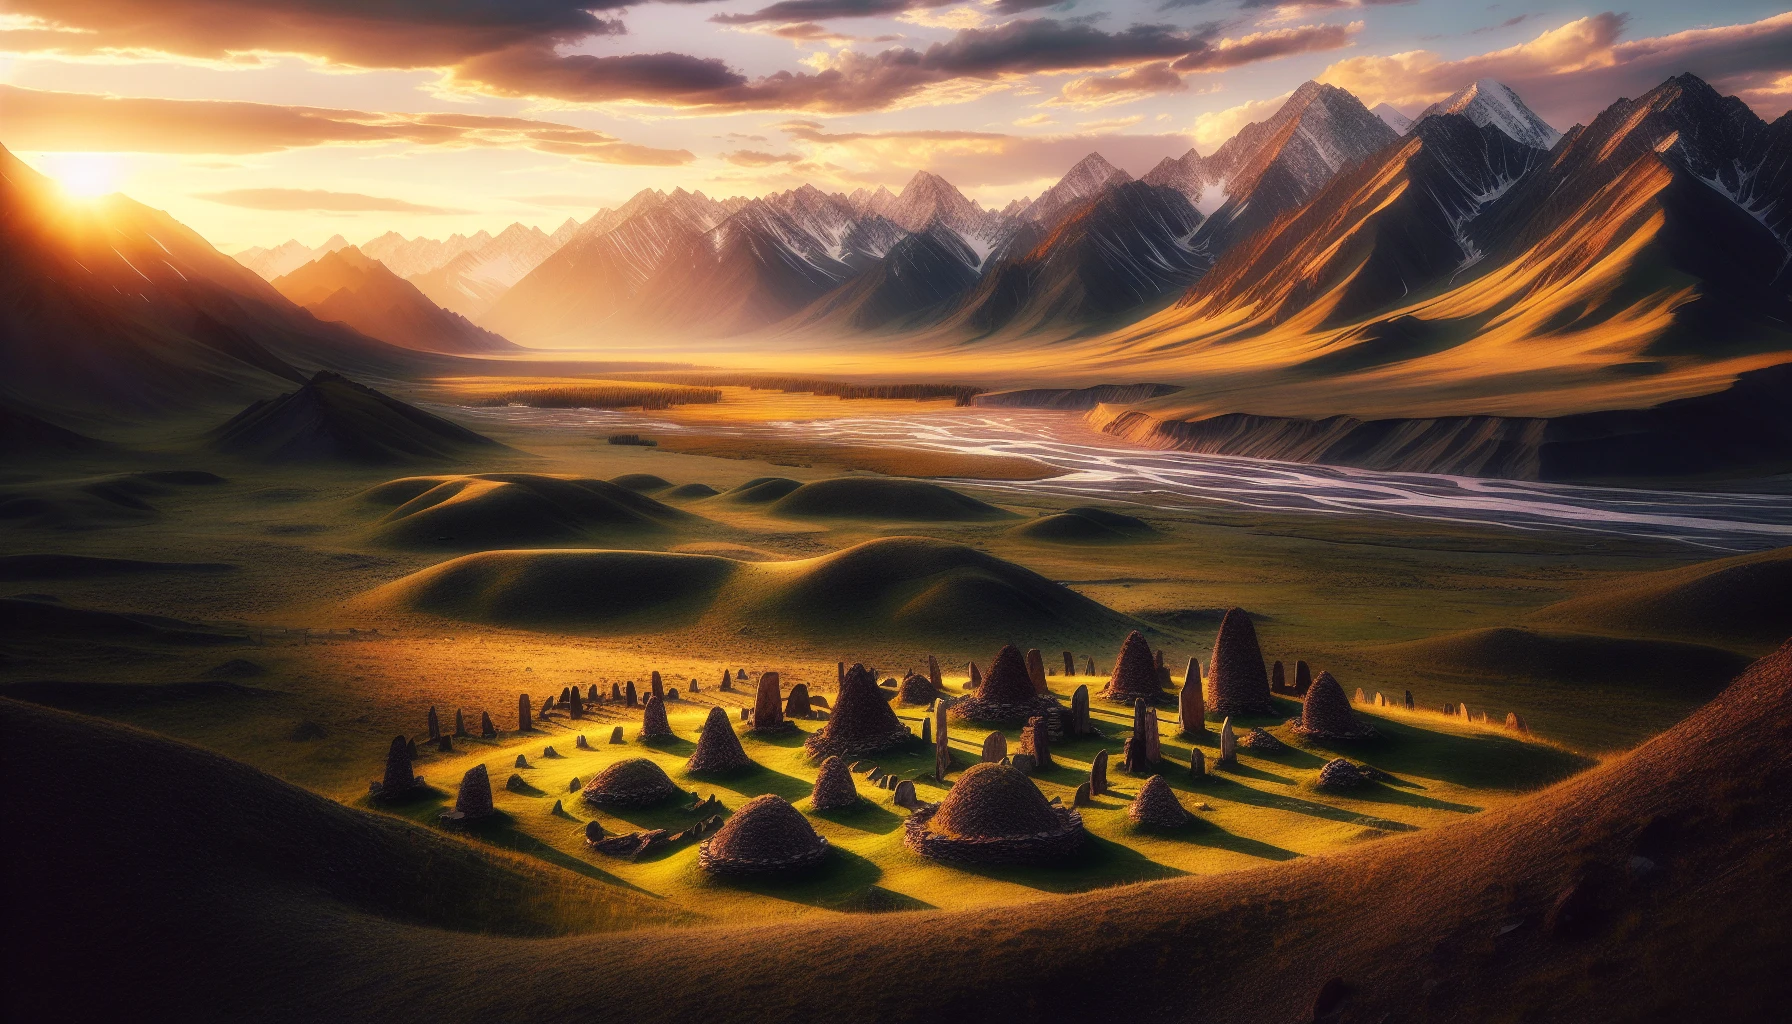 Historical burial mounds in the Altai mountains